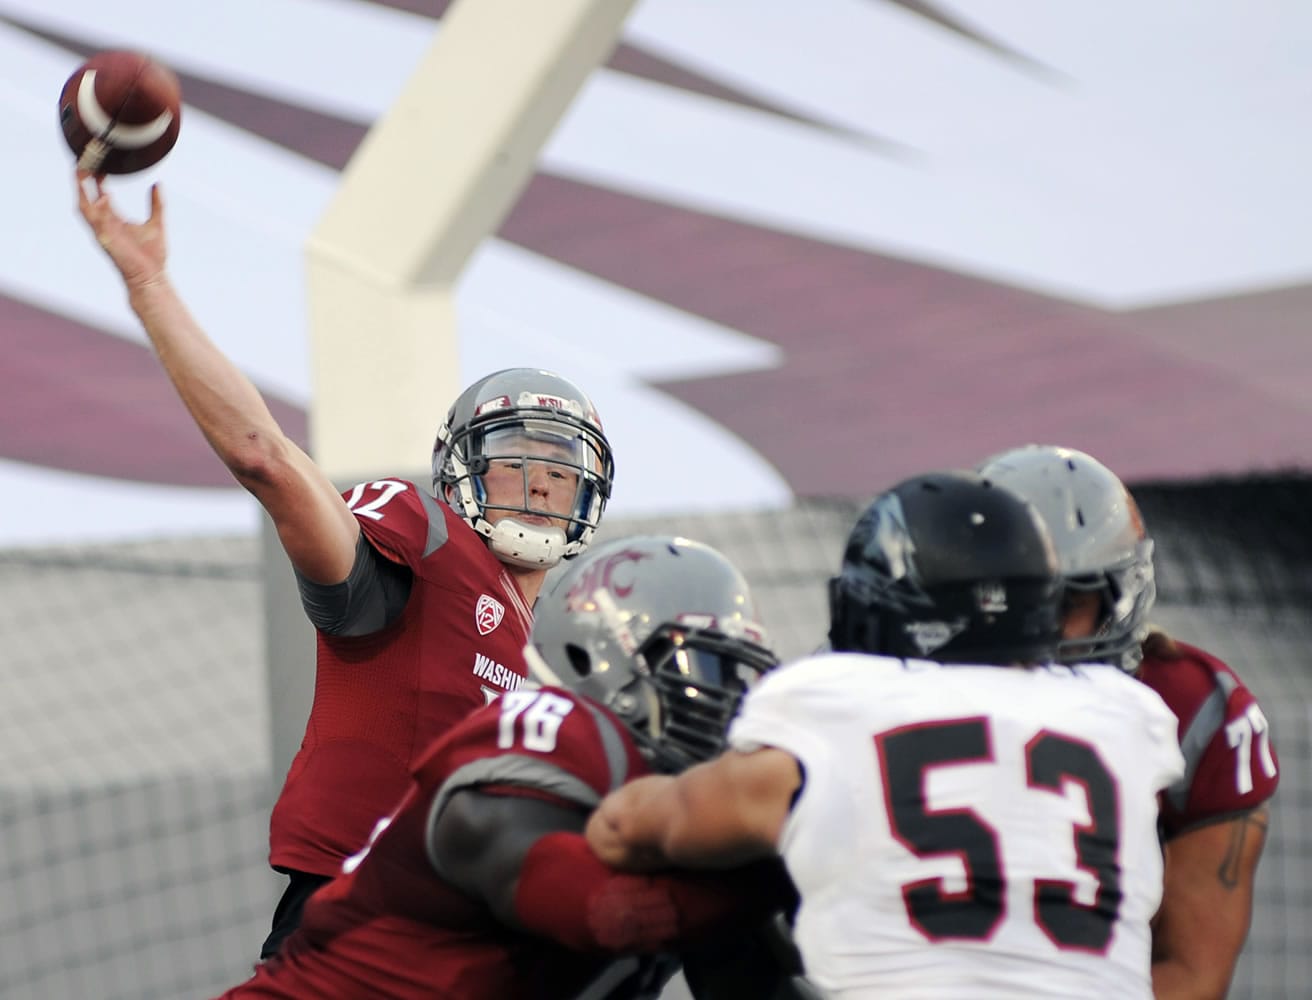 Washinton State quarterback Connor Halliday throws against Southern Utah in the first half Saturday at Pullman.